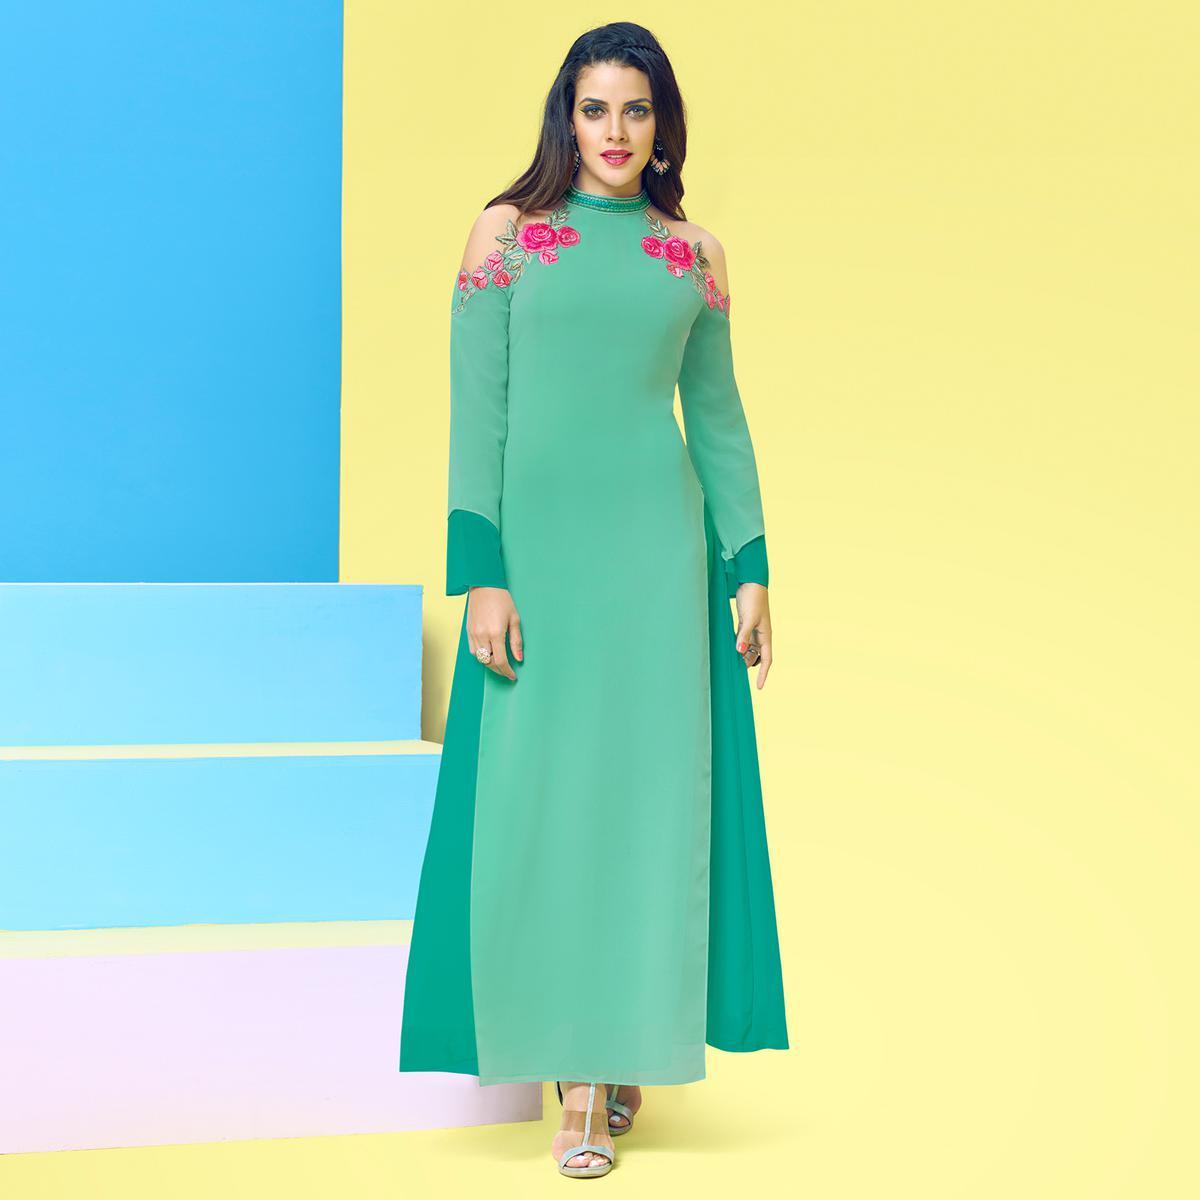 Desirable Turquoise Green Colored Party Wear Floral Embroidered Georgette Kurti